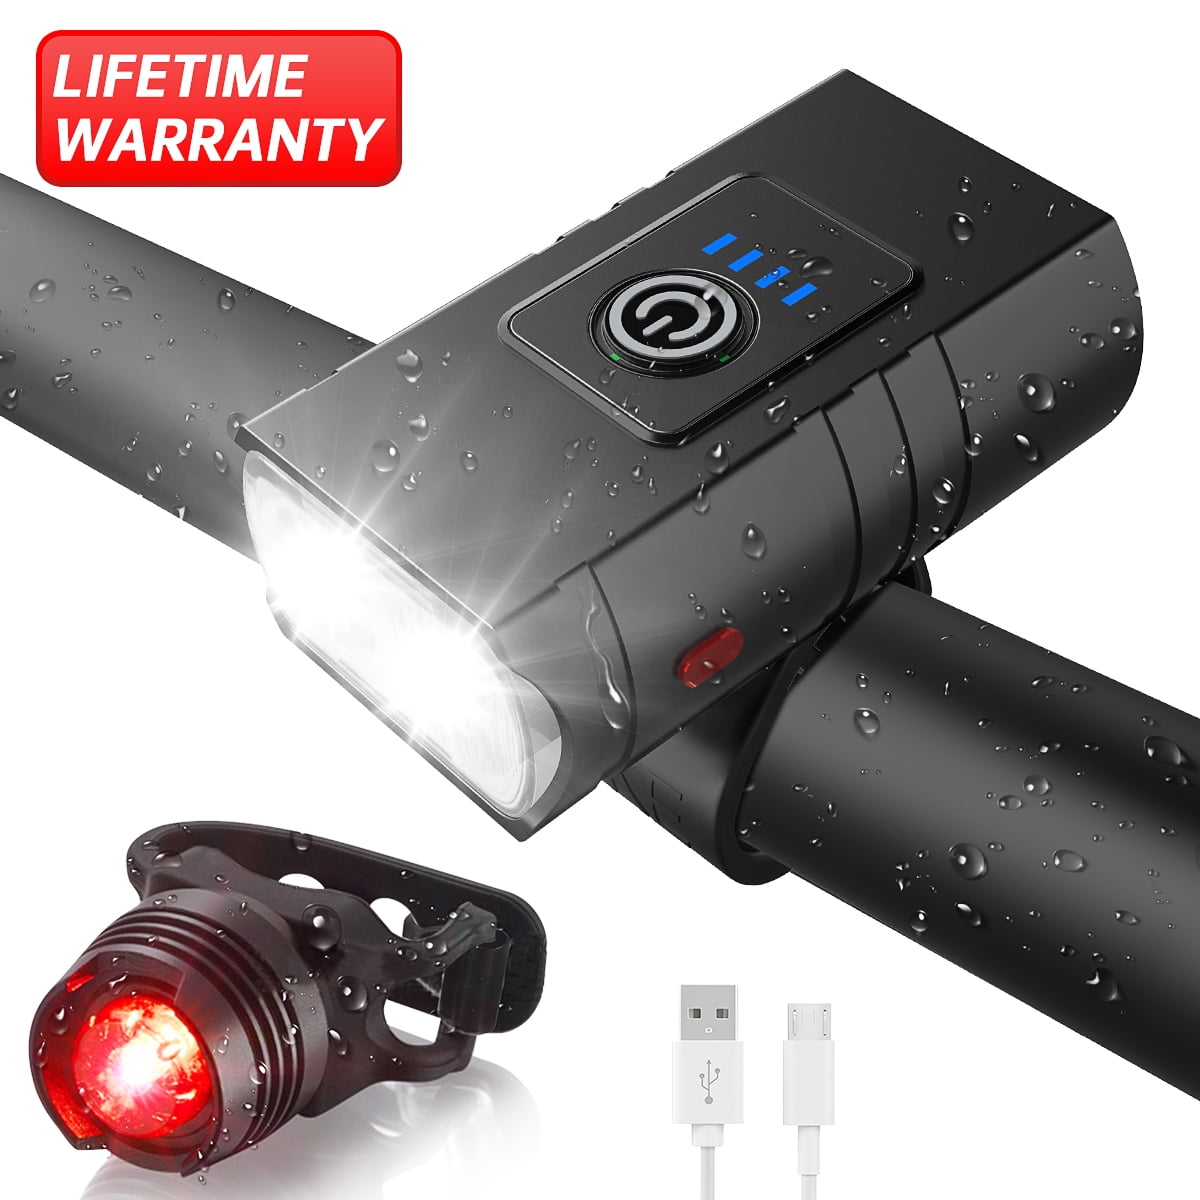 Details about   LED Bicycle Headlight sensing Hand Free Sensor Light Waterproof USB Charge show original title 